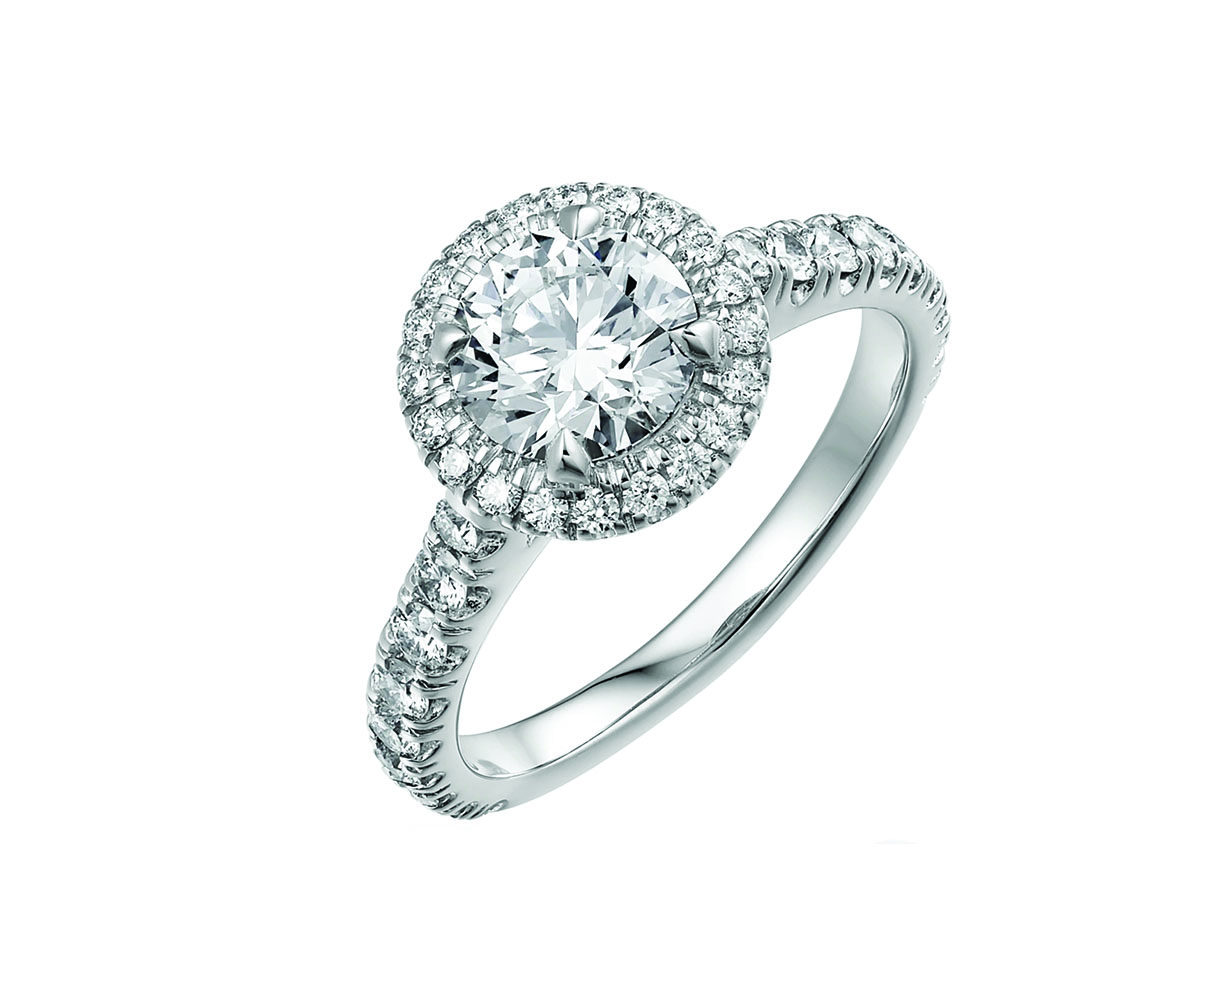 Classic round cut diamond engagement ring with a halo of diamonds and platinum diamond band